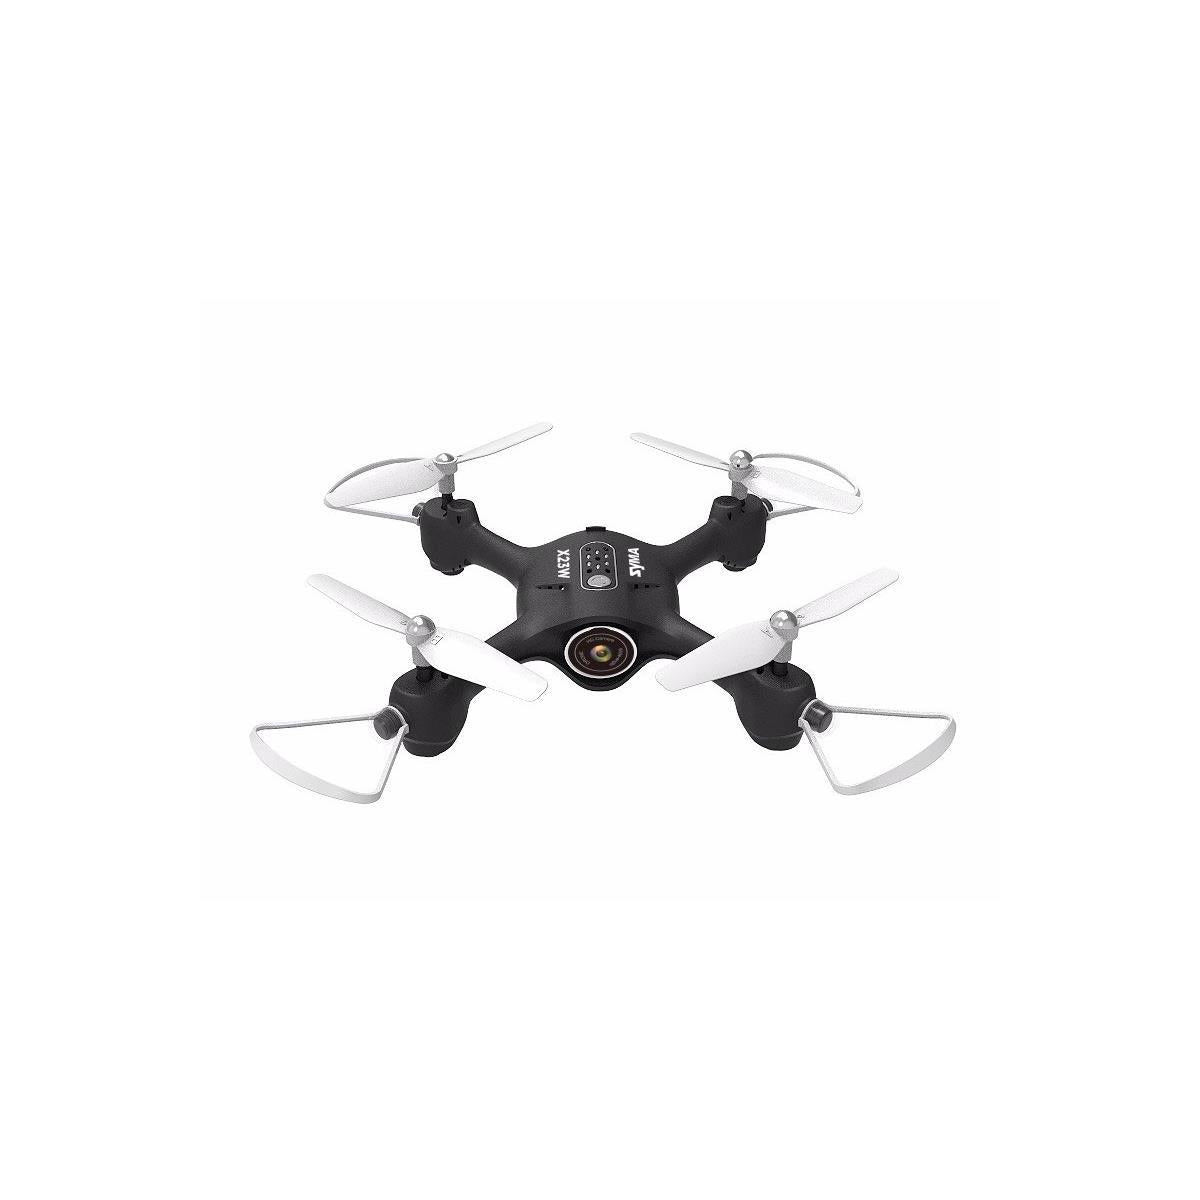 Syma X23W FPV Real-Time Quadcopter with 720p HD Wi-Fi Camera, Black